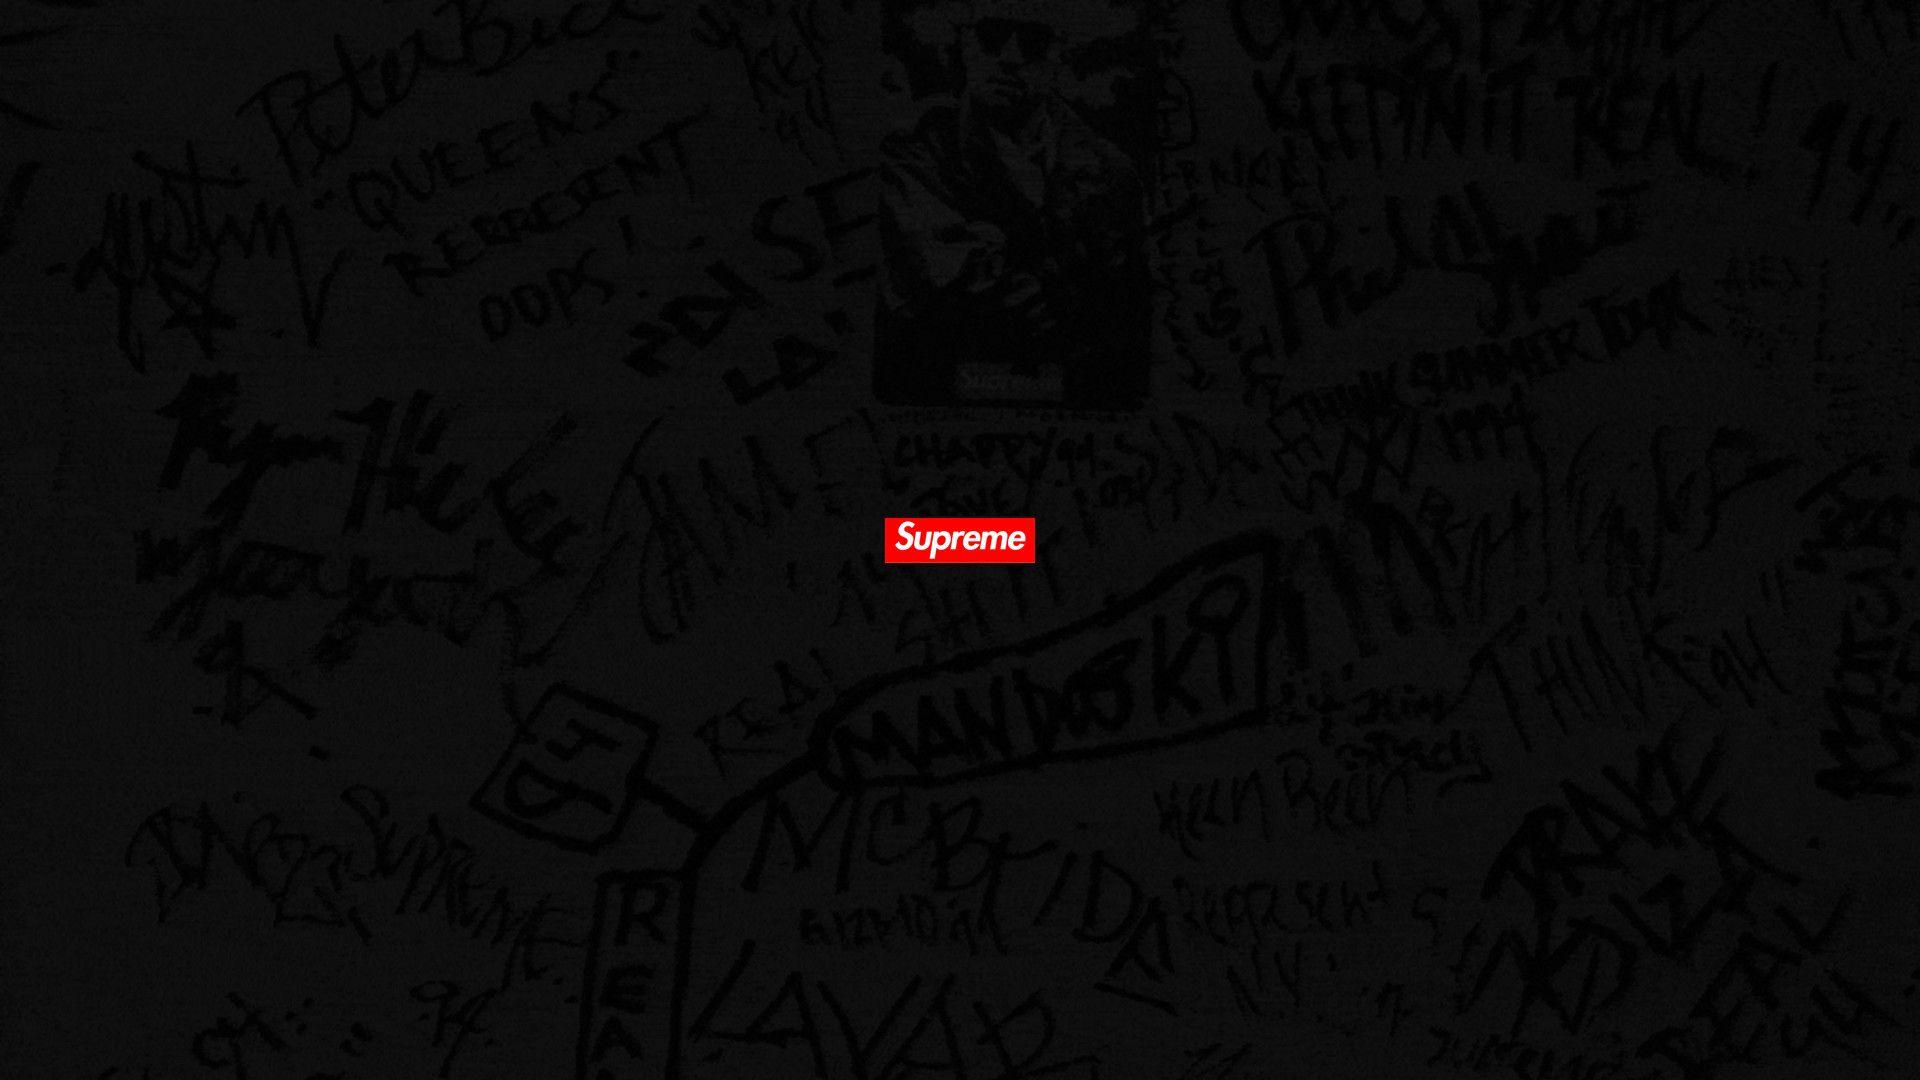 Supreme Wallpaper Wallpaper Background of Your